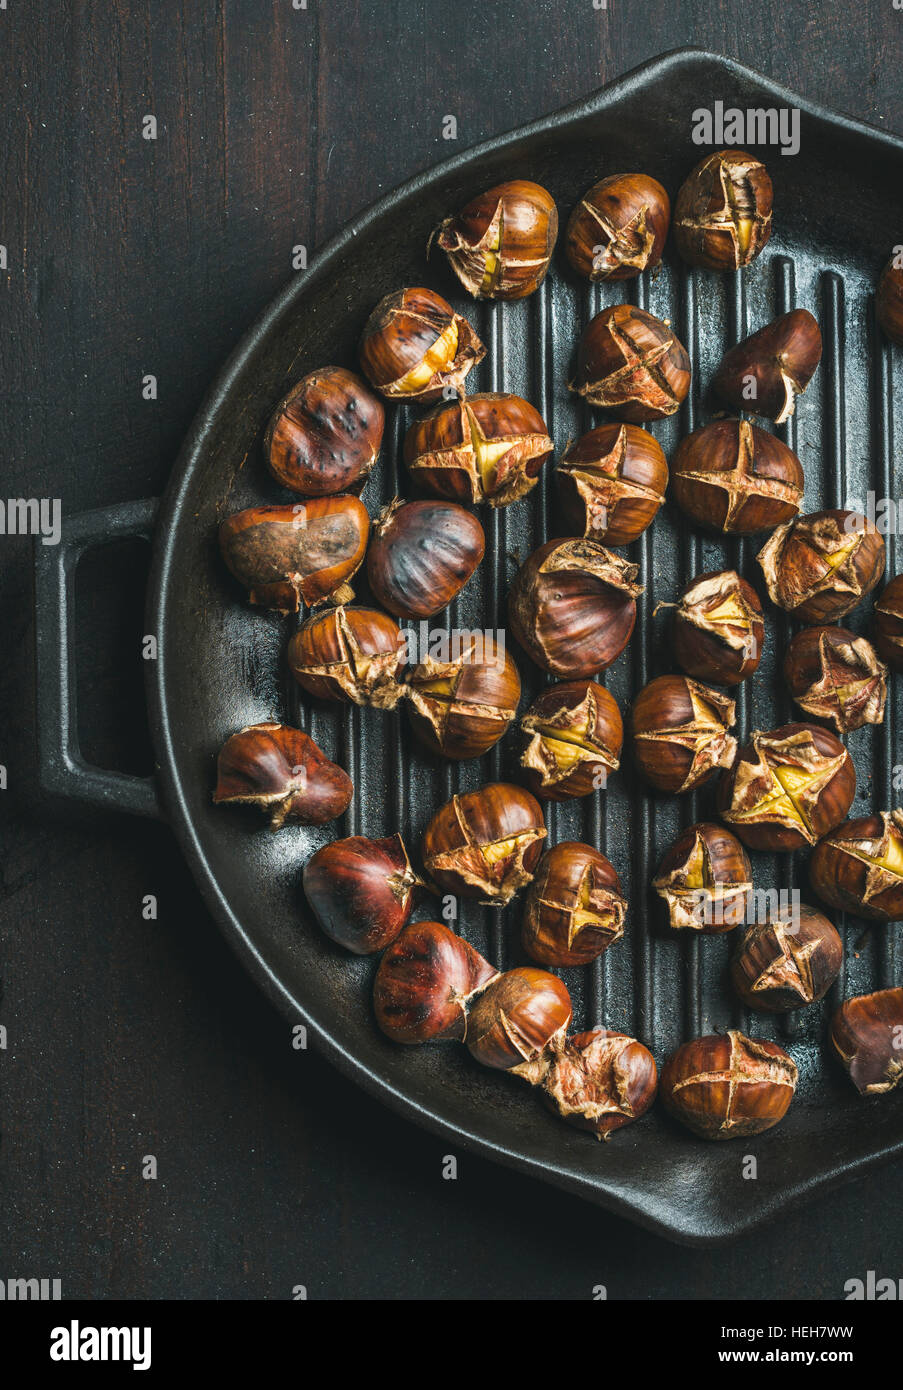 Roasted chestnuts in cast iron grilling pan over dark wooden background, top view, vertical composition Stock Photo